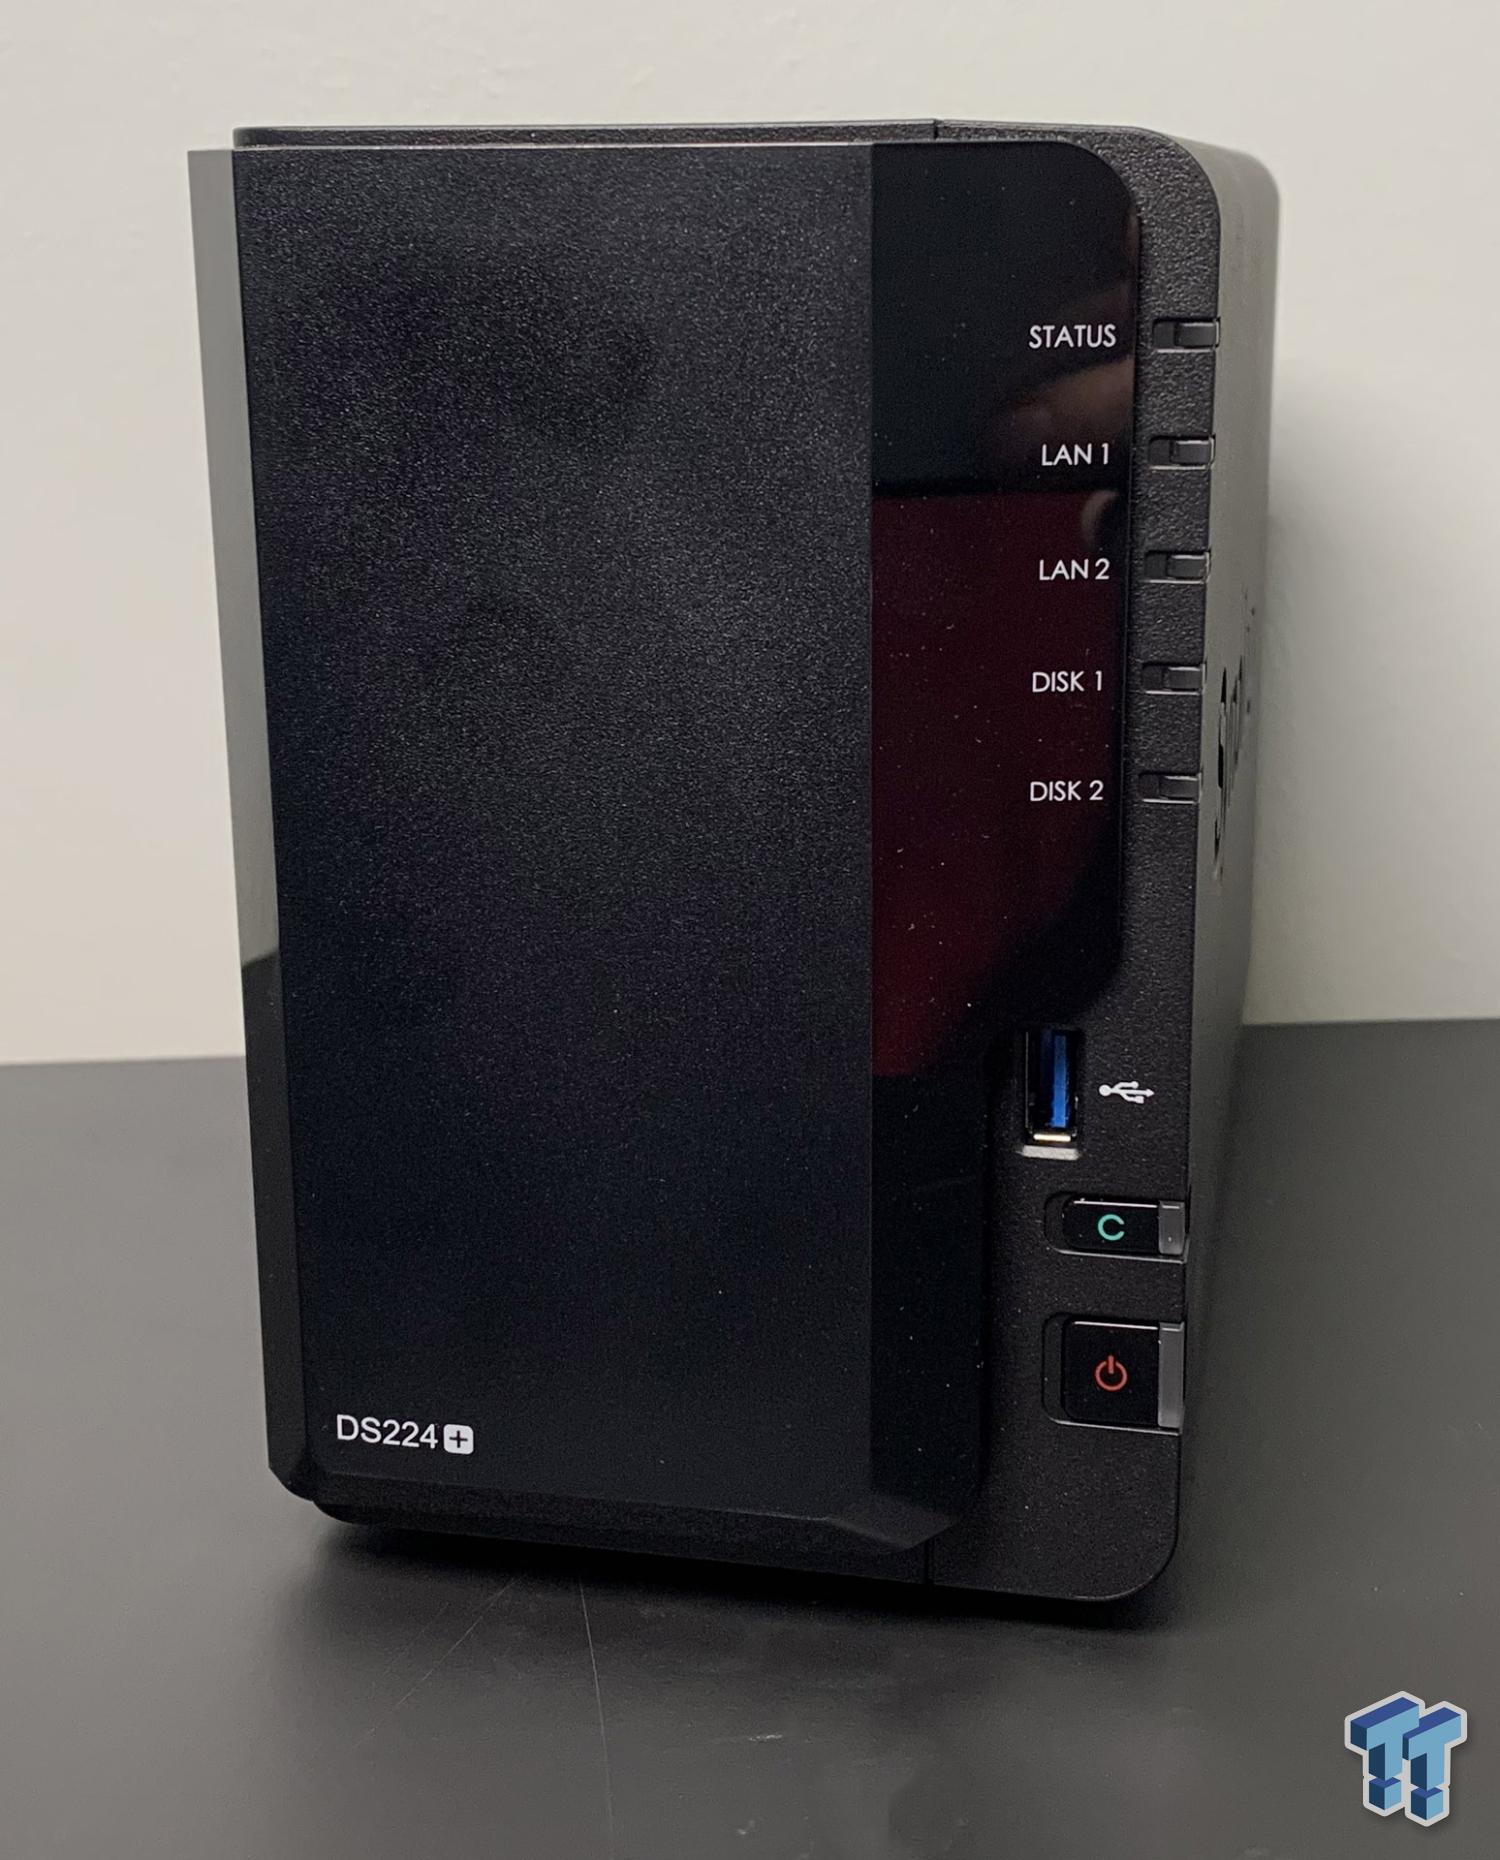 Synology DiskStation DS723+ review: Compact yet Powerful NAS - Tech Advisor